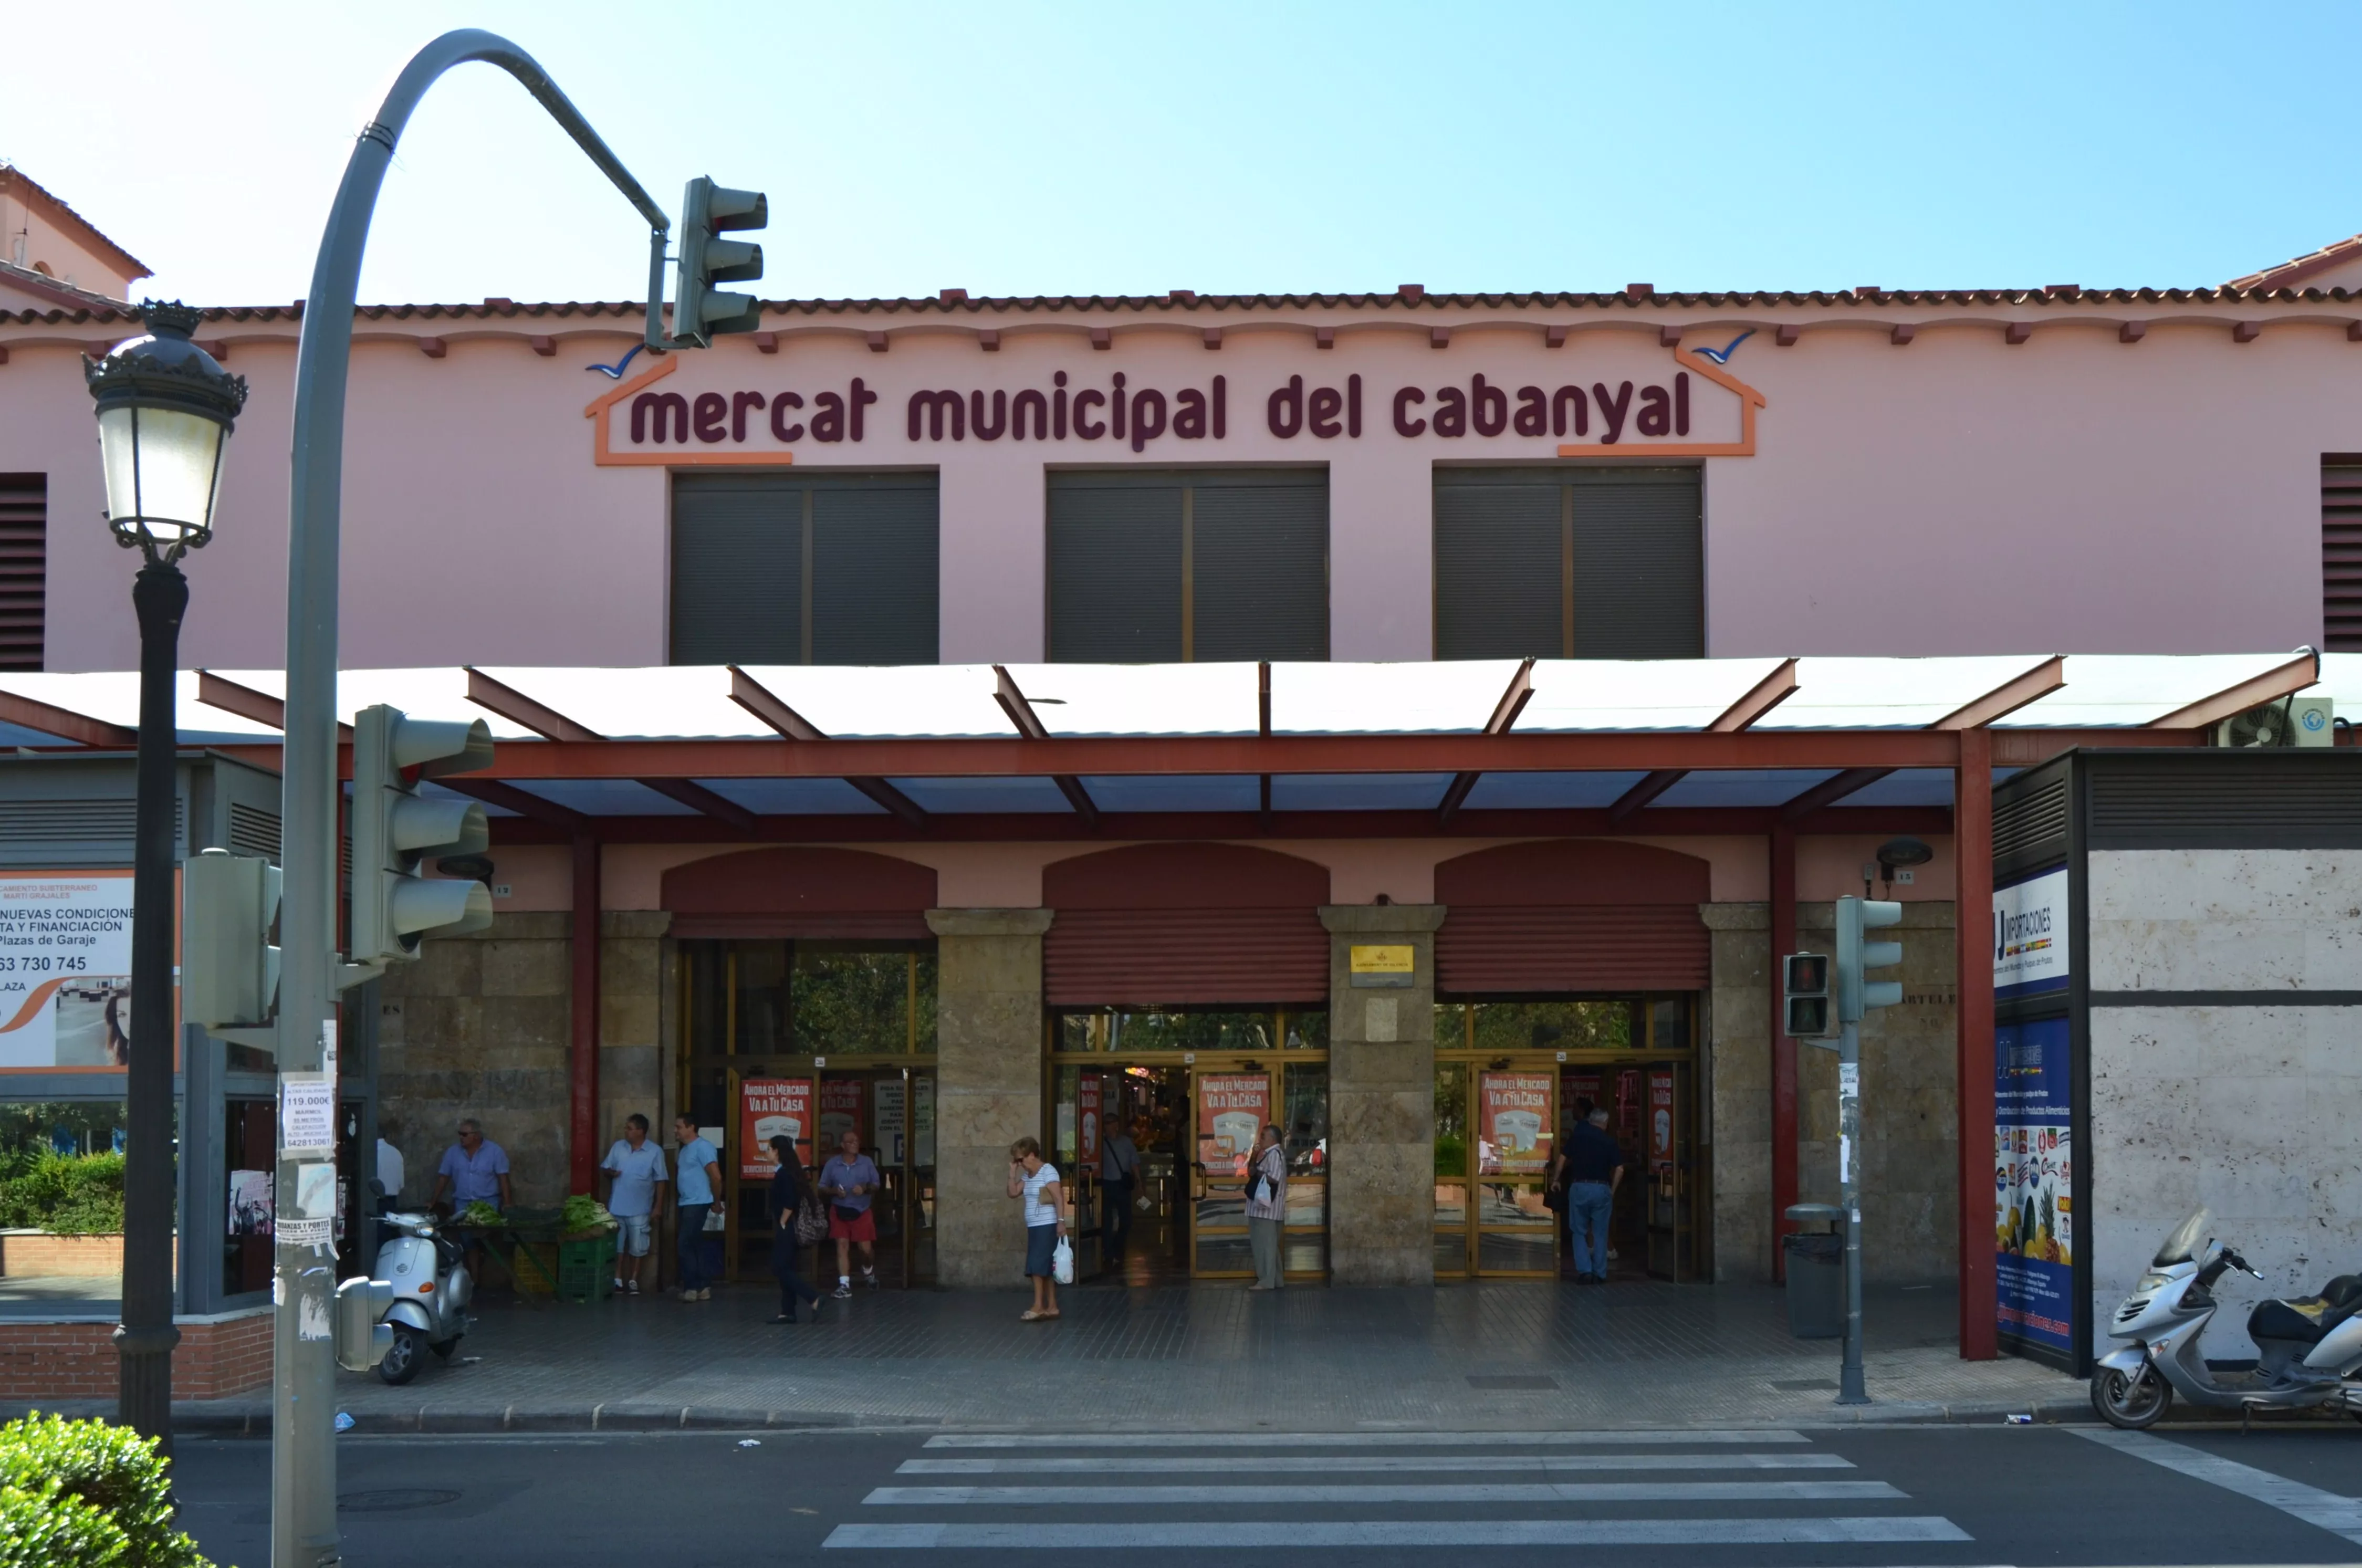 Municipal Market of Cabanyal in Spain, Europe | Architecture - Rated 3.7